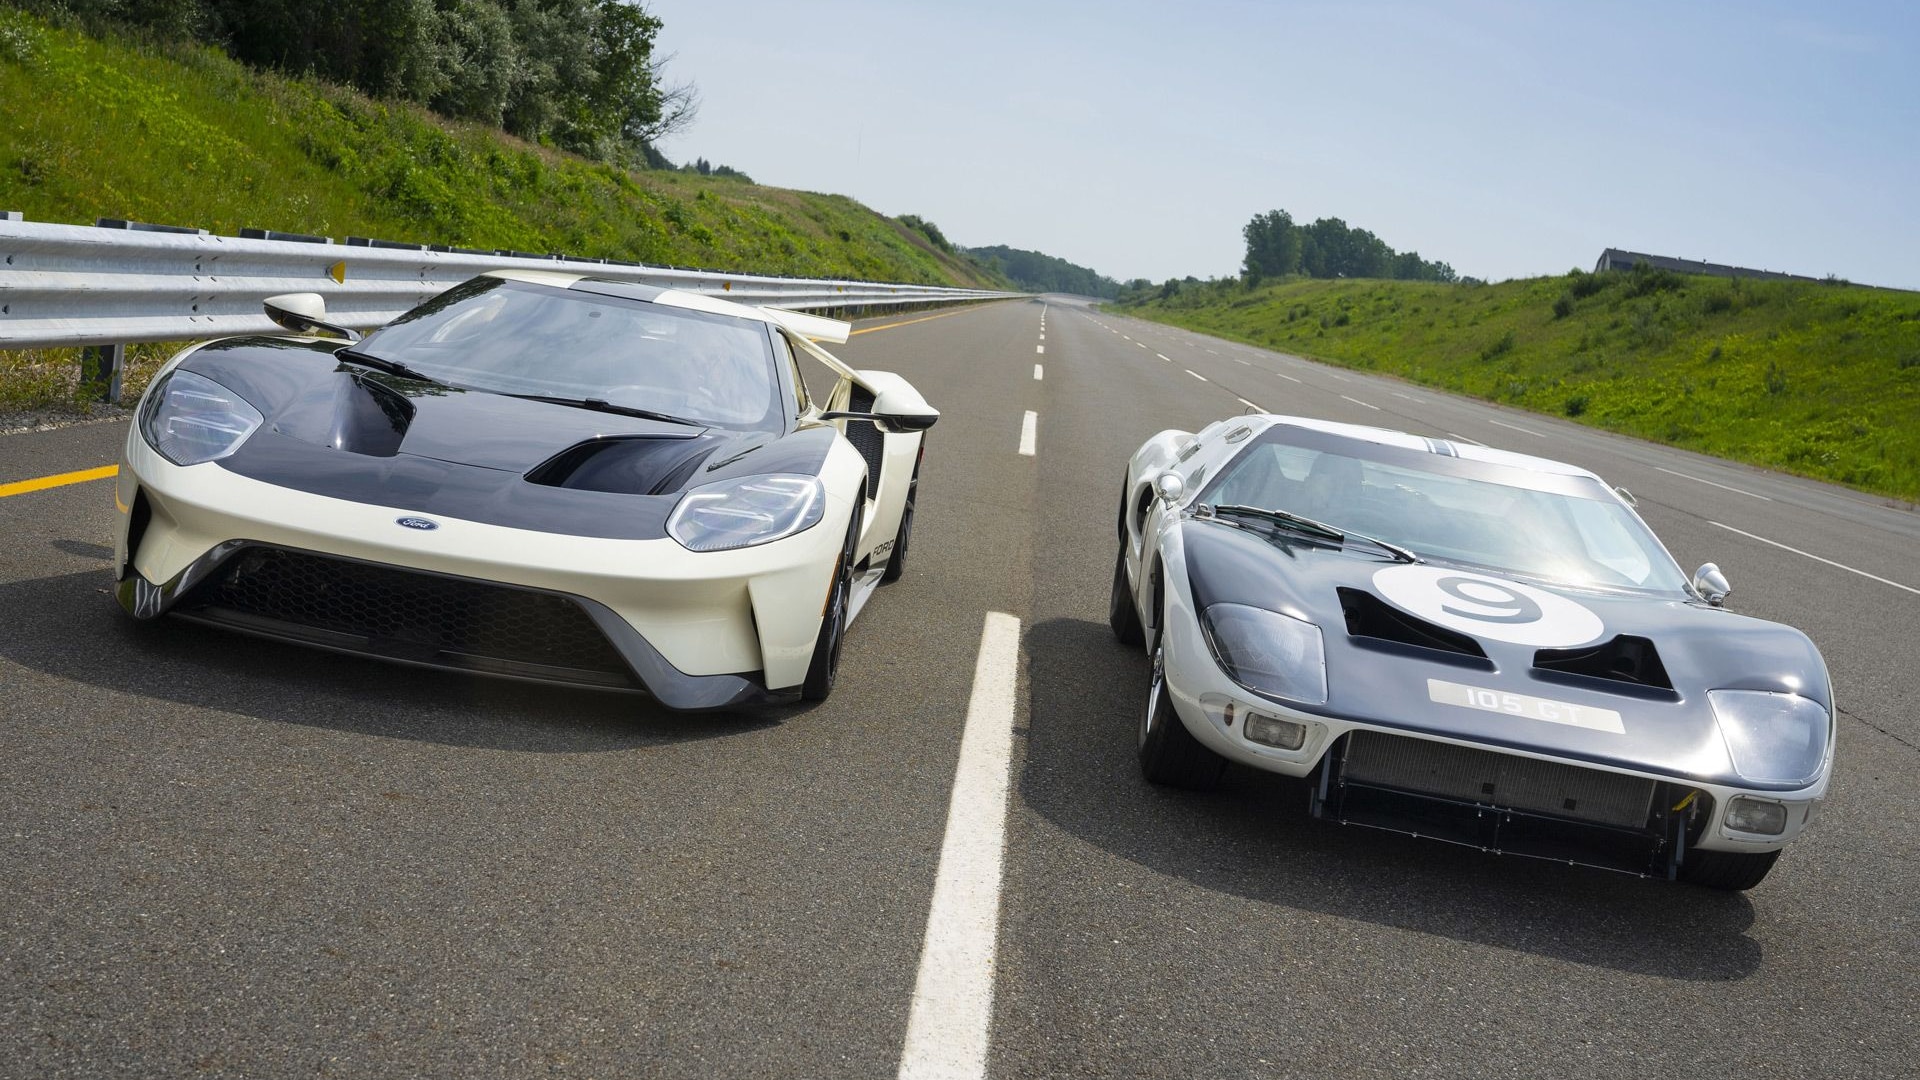 2022 Ford GT Heritage Edition and 1964 Ford GT40 prototype GT/105